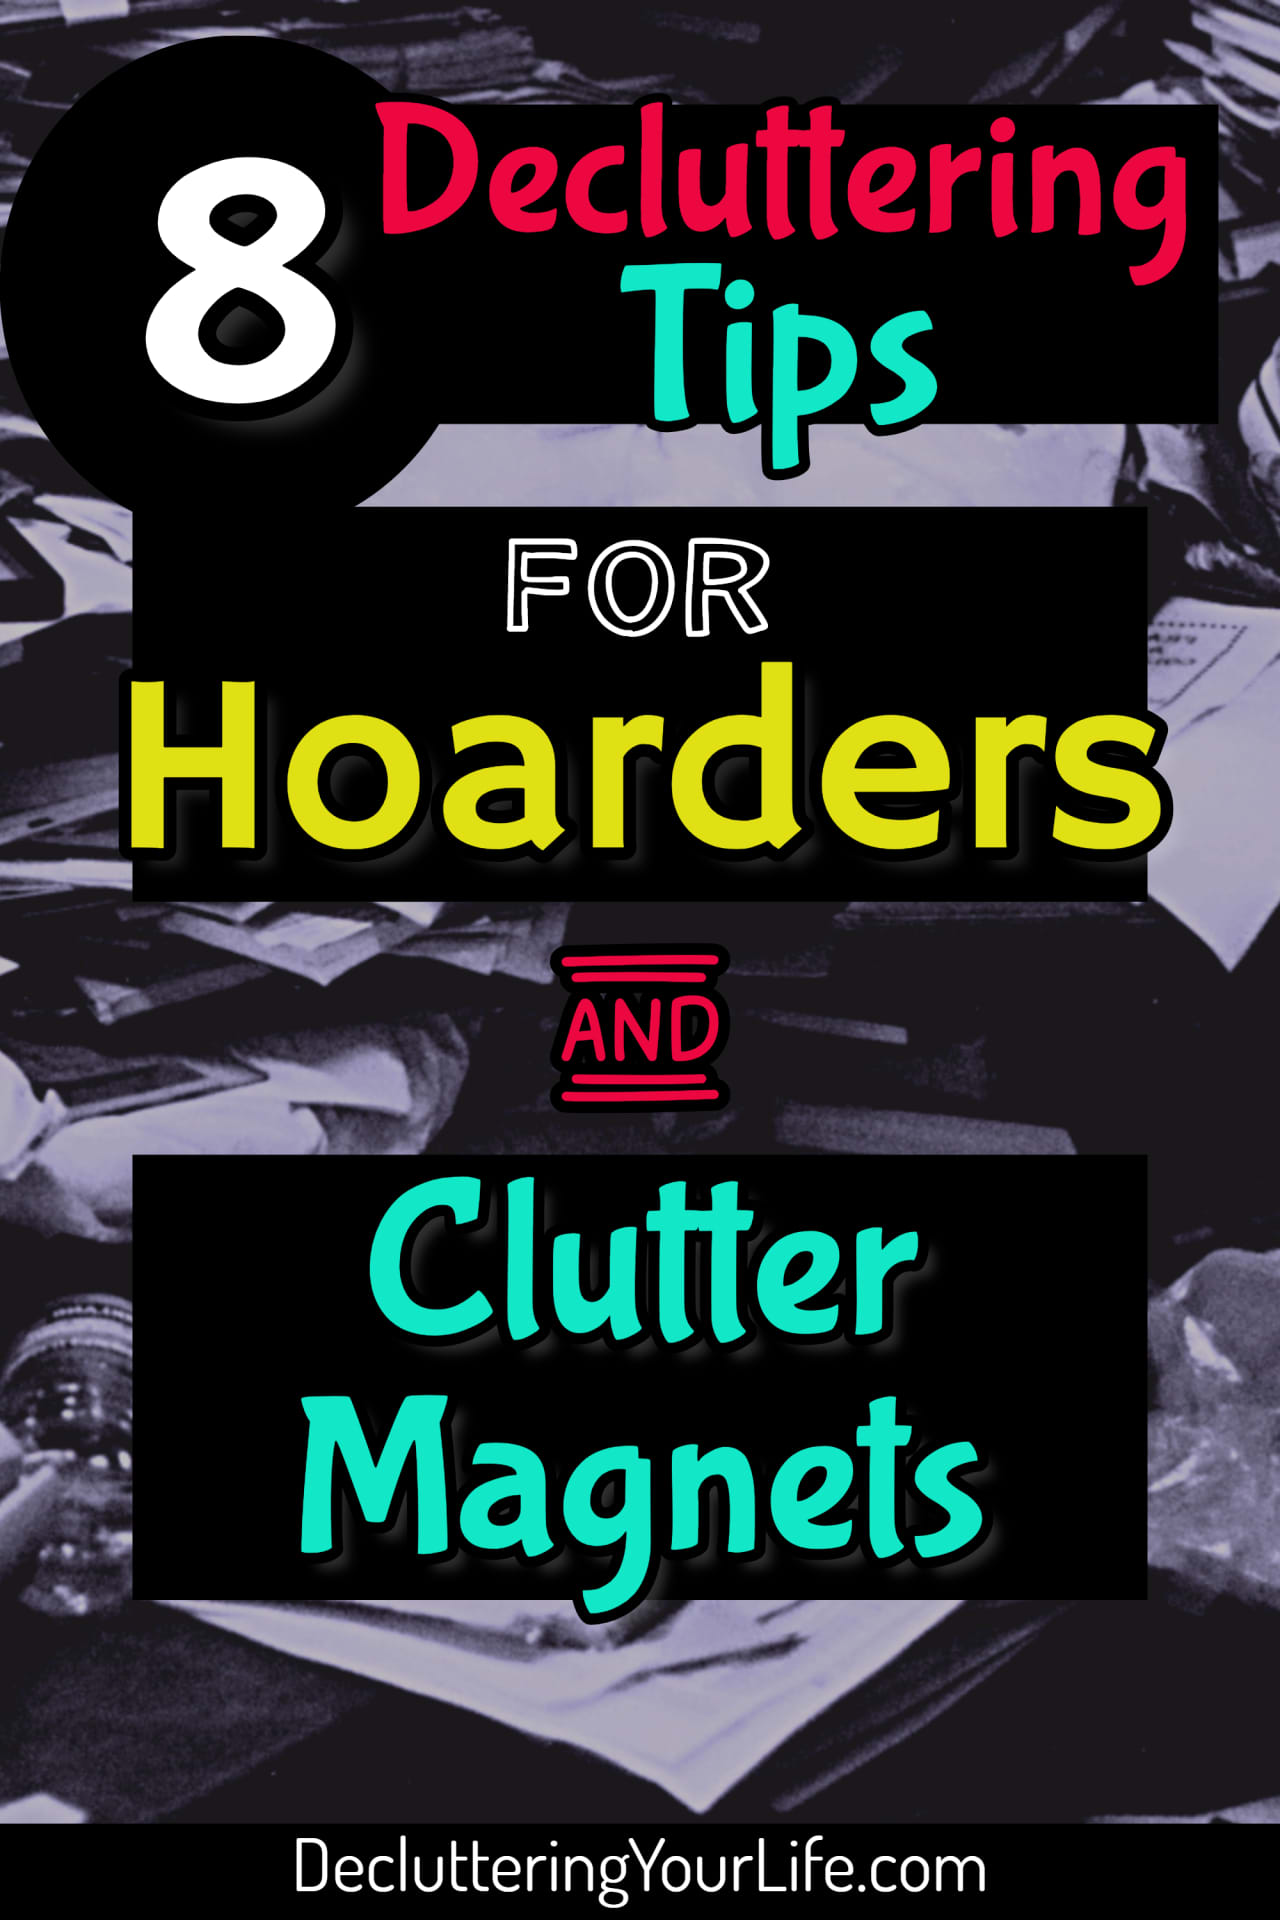 Decluttering ideas - How to declutter and organize when you're overwhelmed with too much STUFF!  Many hoarders, packrats or "clutter magnets" feel they are drowning in STUFF in their messy house.  Here's 8 cleaning and organizing tips for hoarders to put in your printable household notebook.  These home organization hacks & speed cleaning tips / checklists DO work - even if your clutter is out of control.